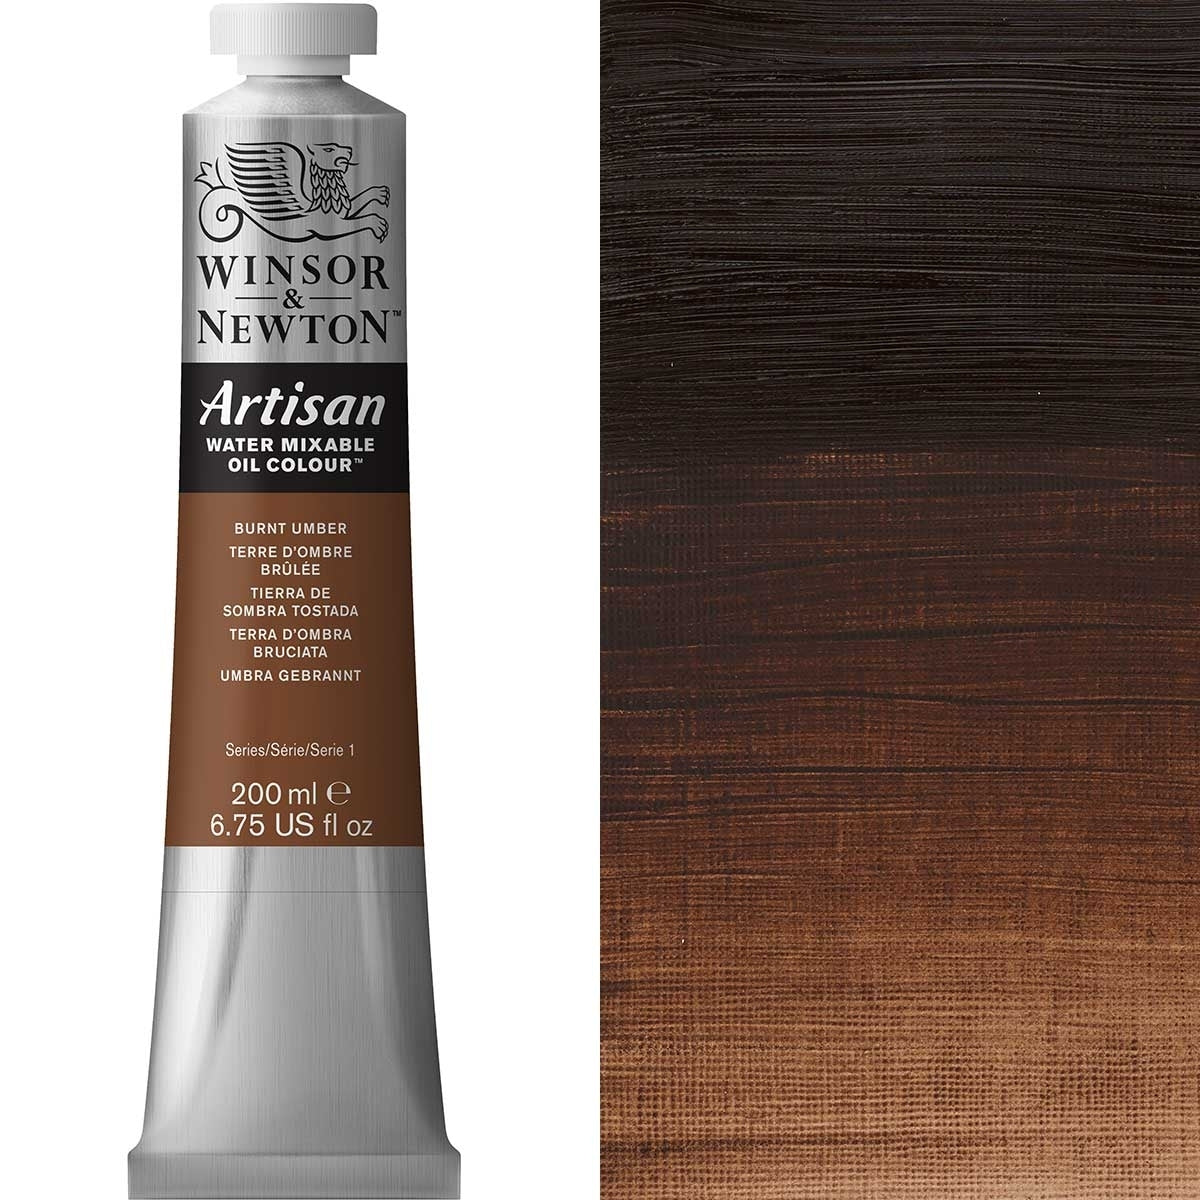 Winsor and Newton - Artisan Oil Colour Watermixable - 200ml - Burnt Umber